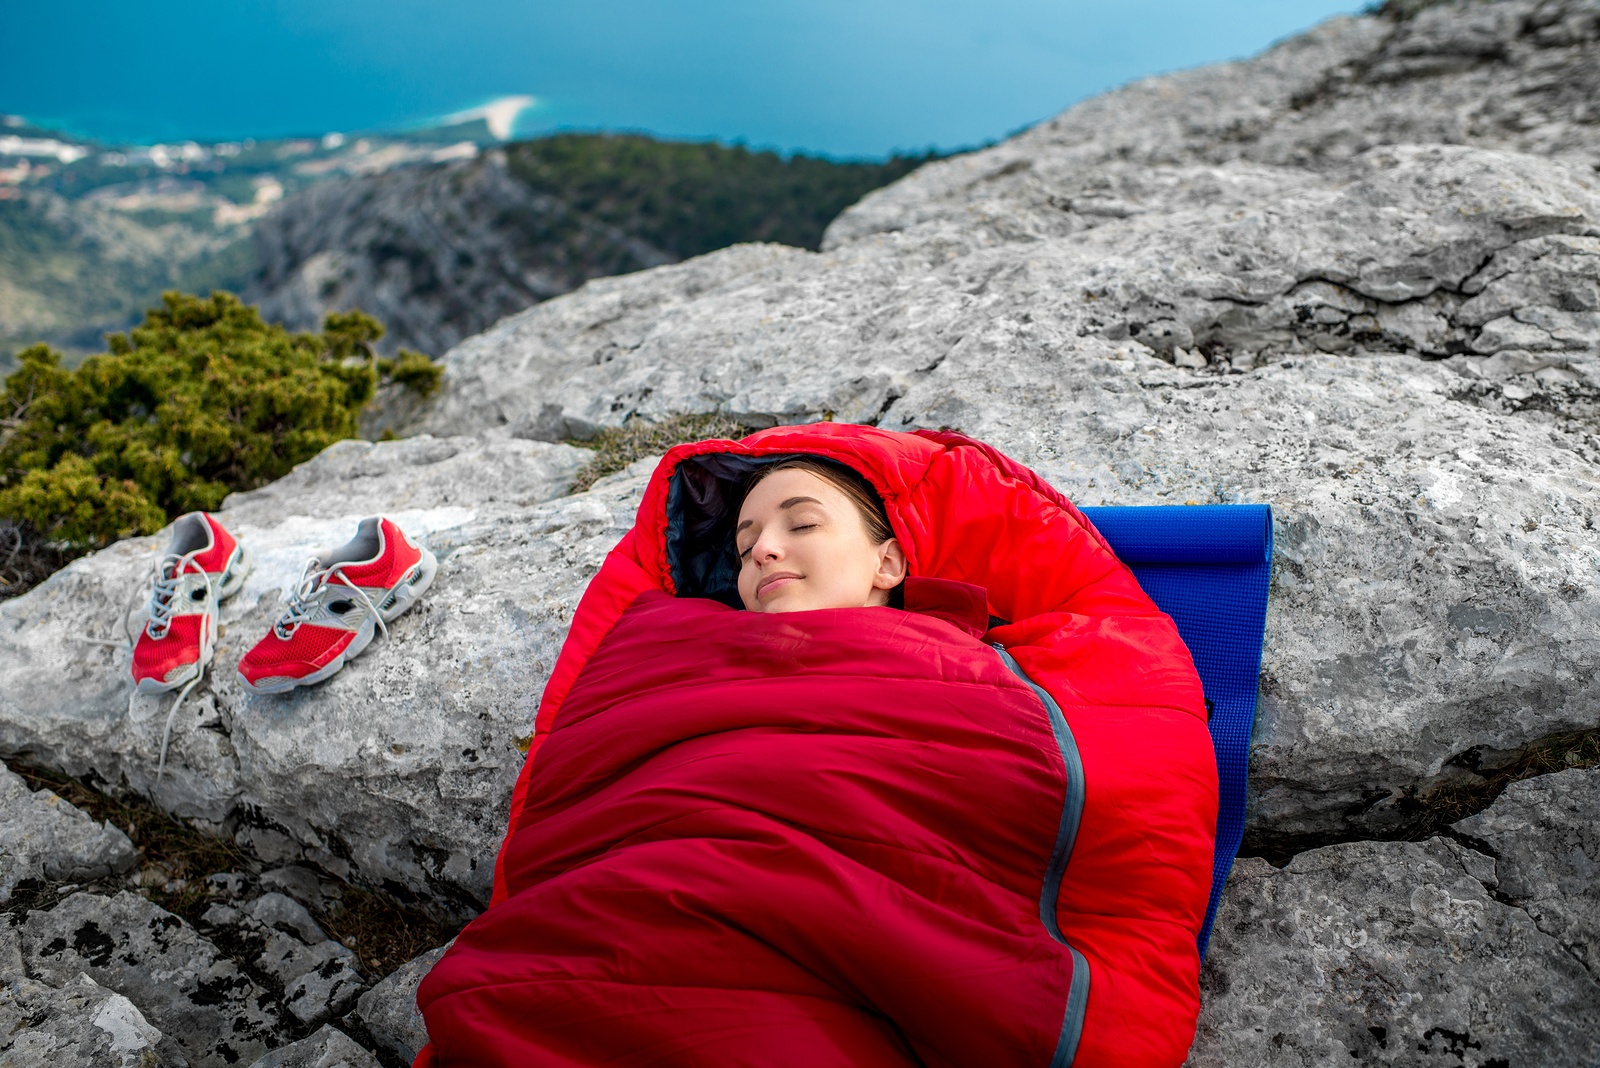 Young woman sleeping in red sleeping bag on the rocky mountain